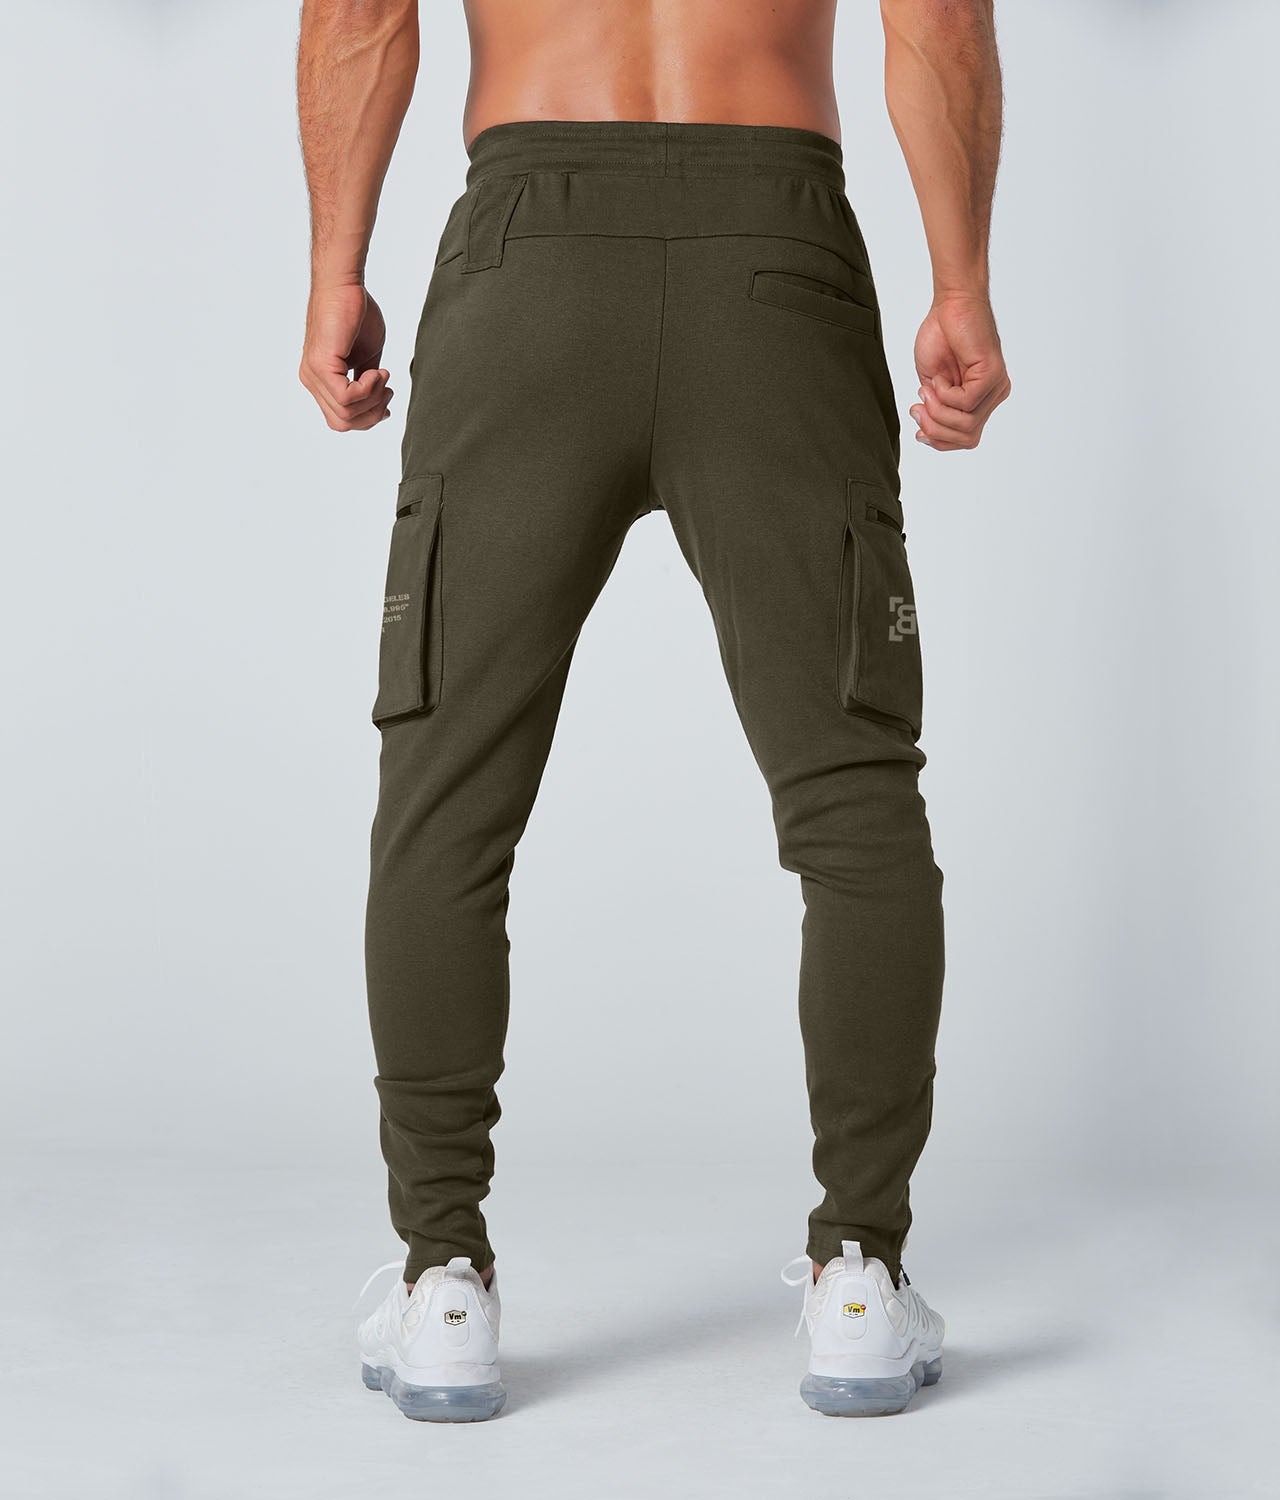 Shine on - gentlemen's salon & spa | Men's Trendy Cargo Jogger Pants,  Breathable Thin Trousers For Outdoor Working Hiking Spring Fall. Size XL(36)